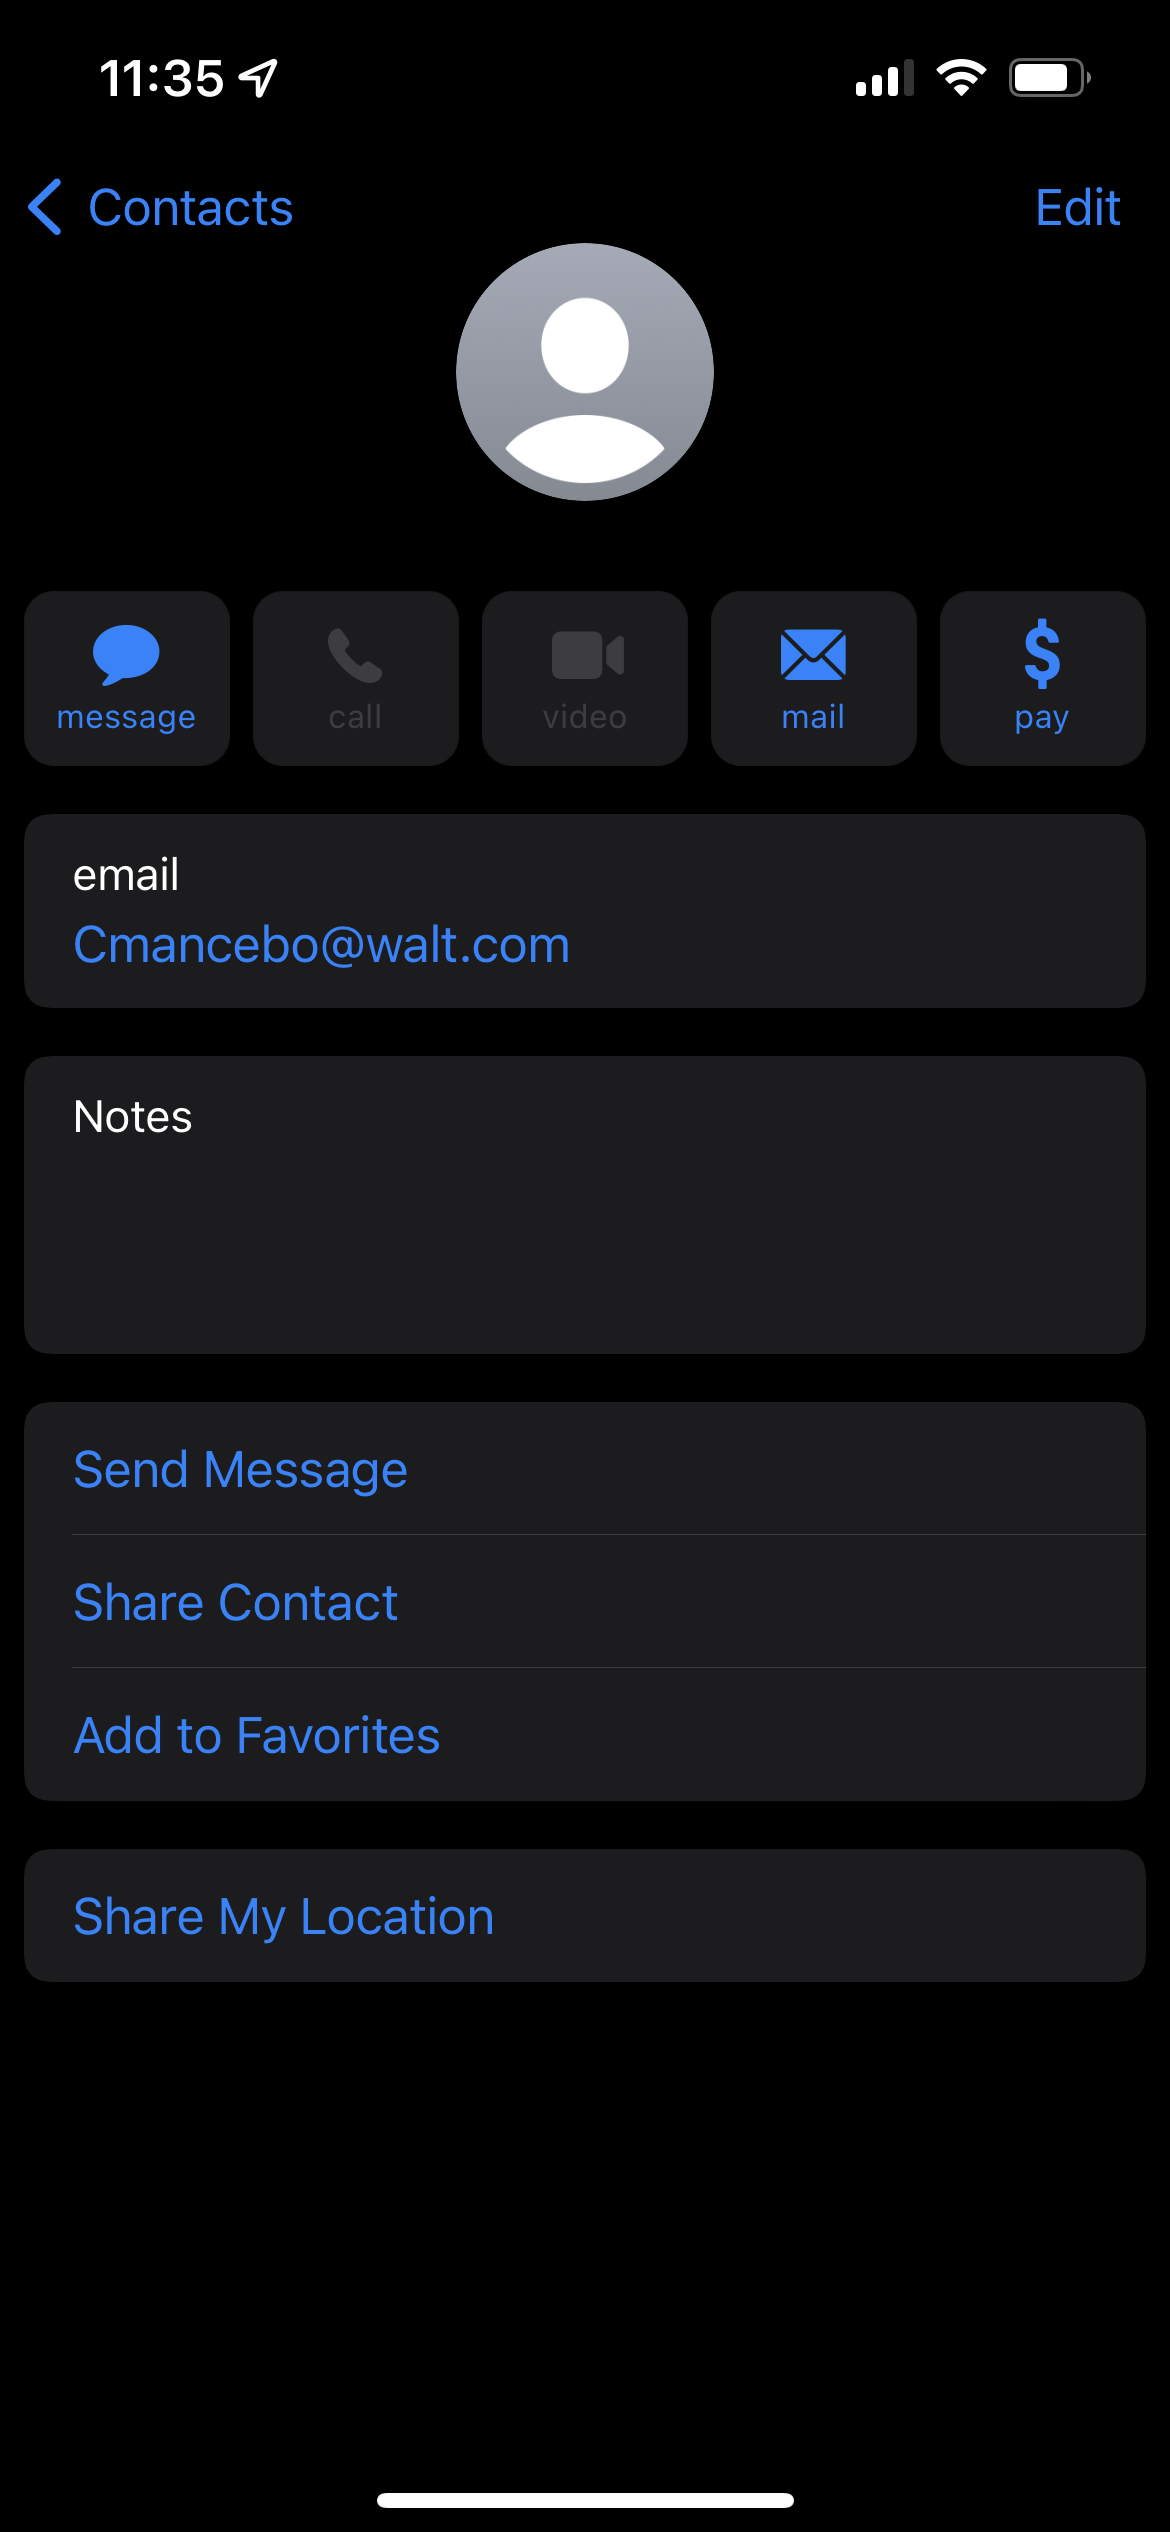 A contact in the iOS 15 Contacts app